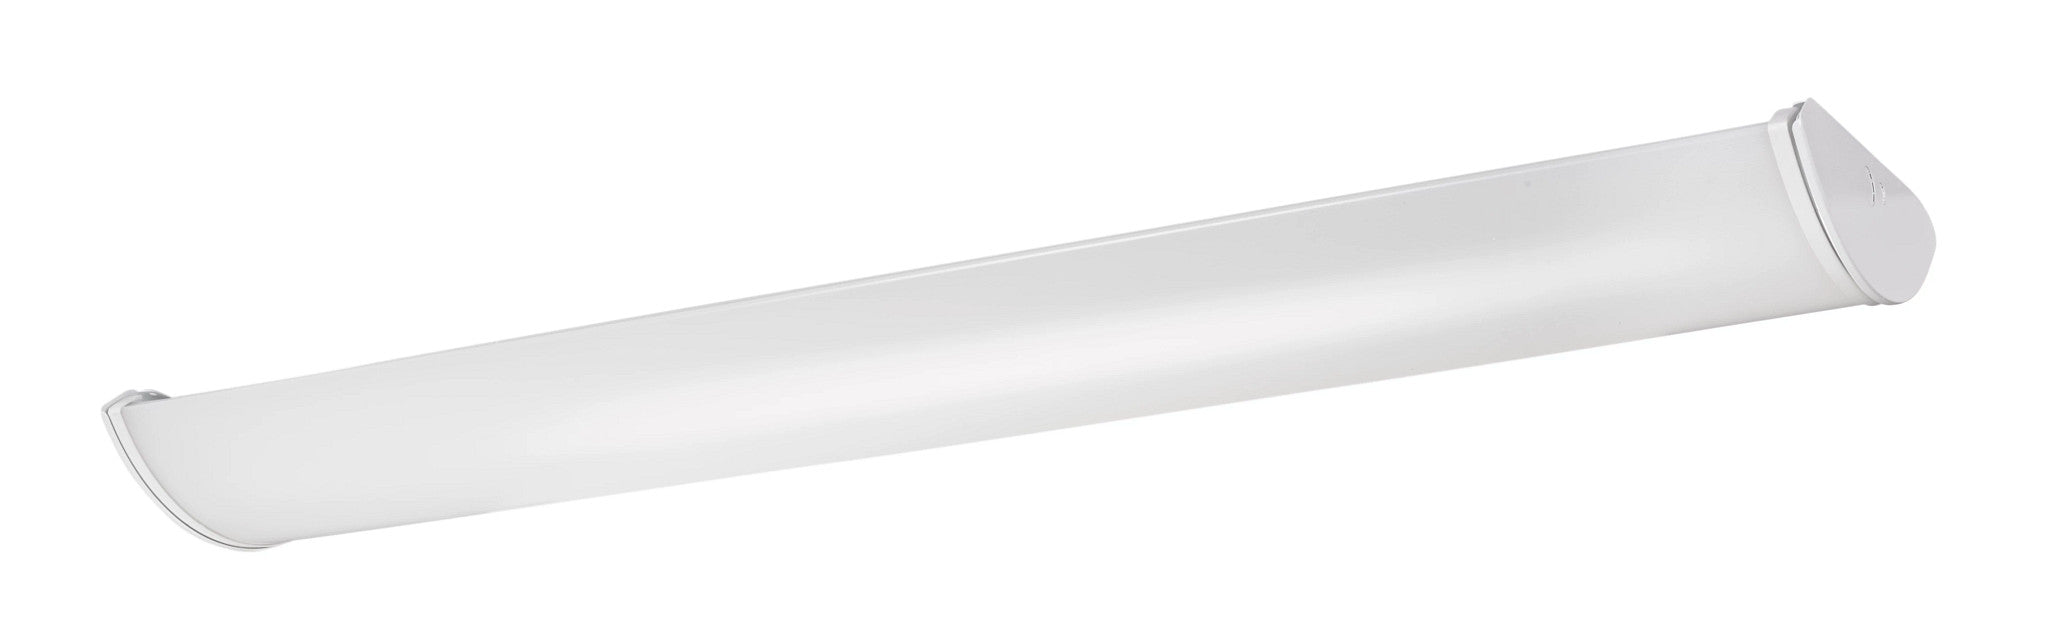 Keystone 4 Foot Curved Wrap Fixture Featuring Wattage/CCT Selectable 44W/28W/18W 3500K/4000K/5000K 120-277V Frosted Lens 0-10V Dimming (KT-CWLED44PS-4-8CSA-VDIM)